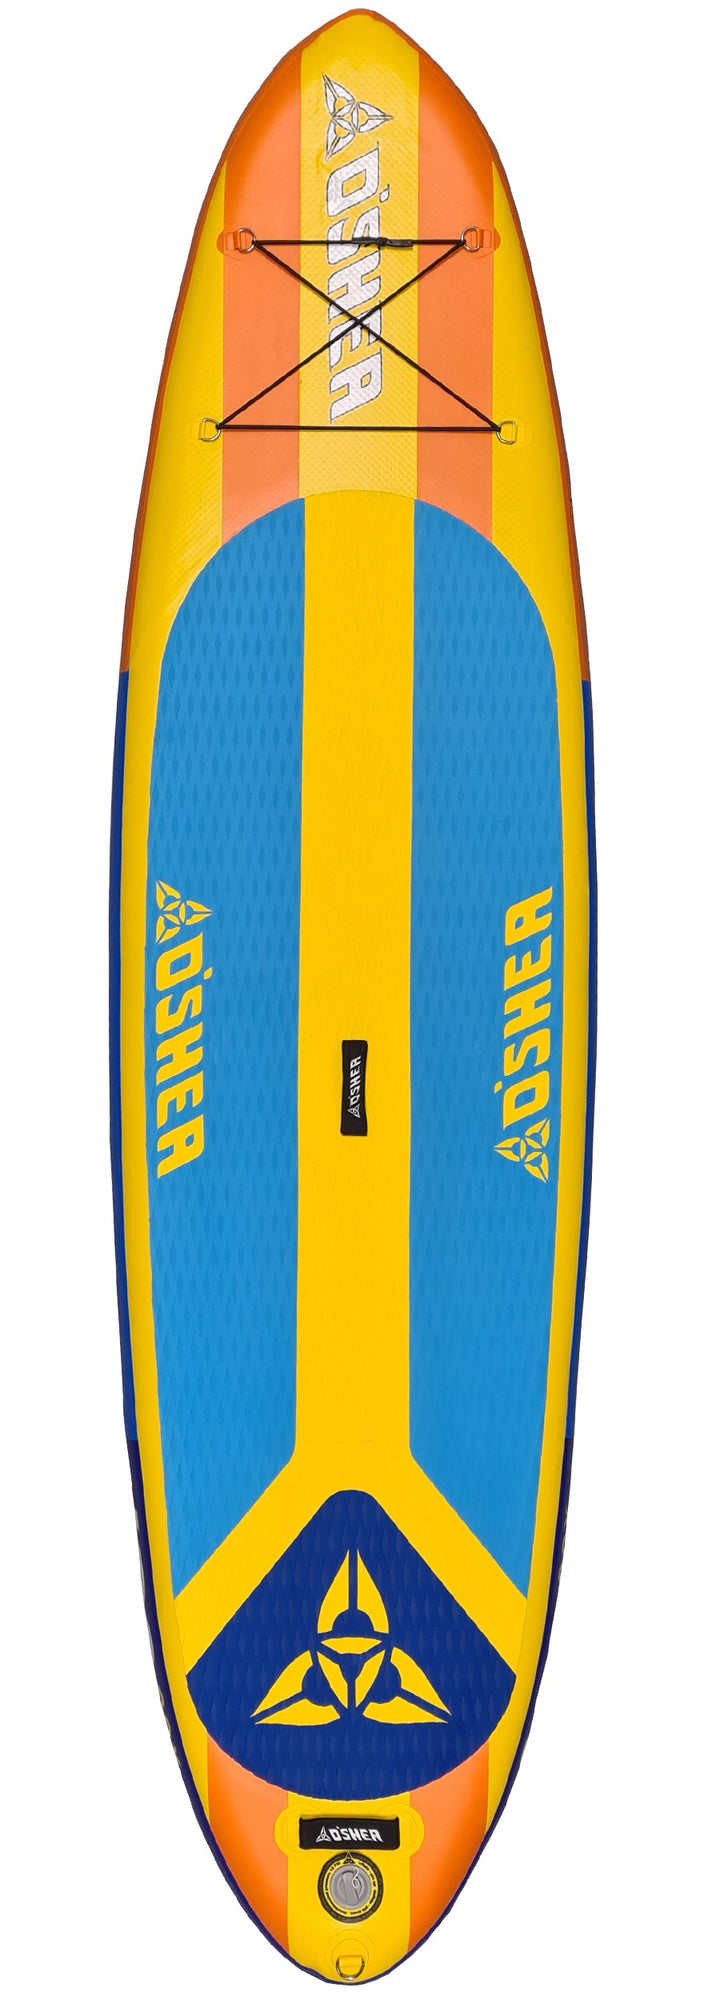 O'Shea 10'2" QSx iSUP Inflatable Stand Up Paddleboard Package - Orange - 2022